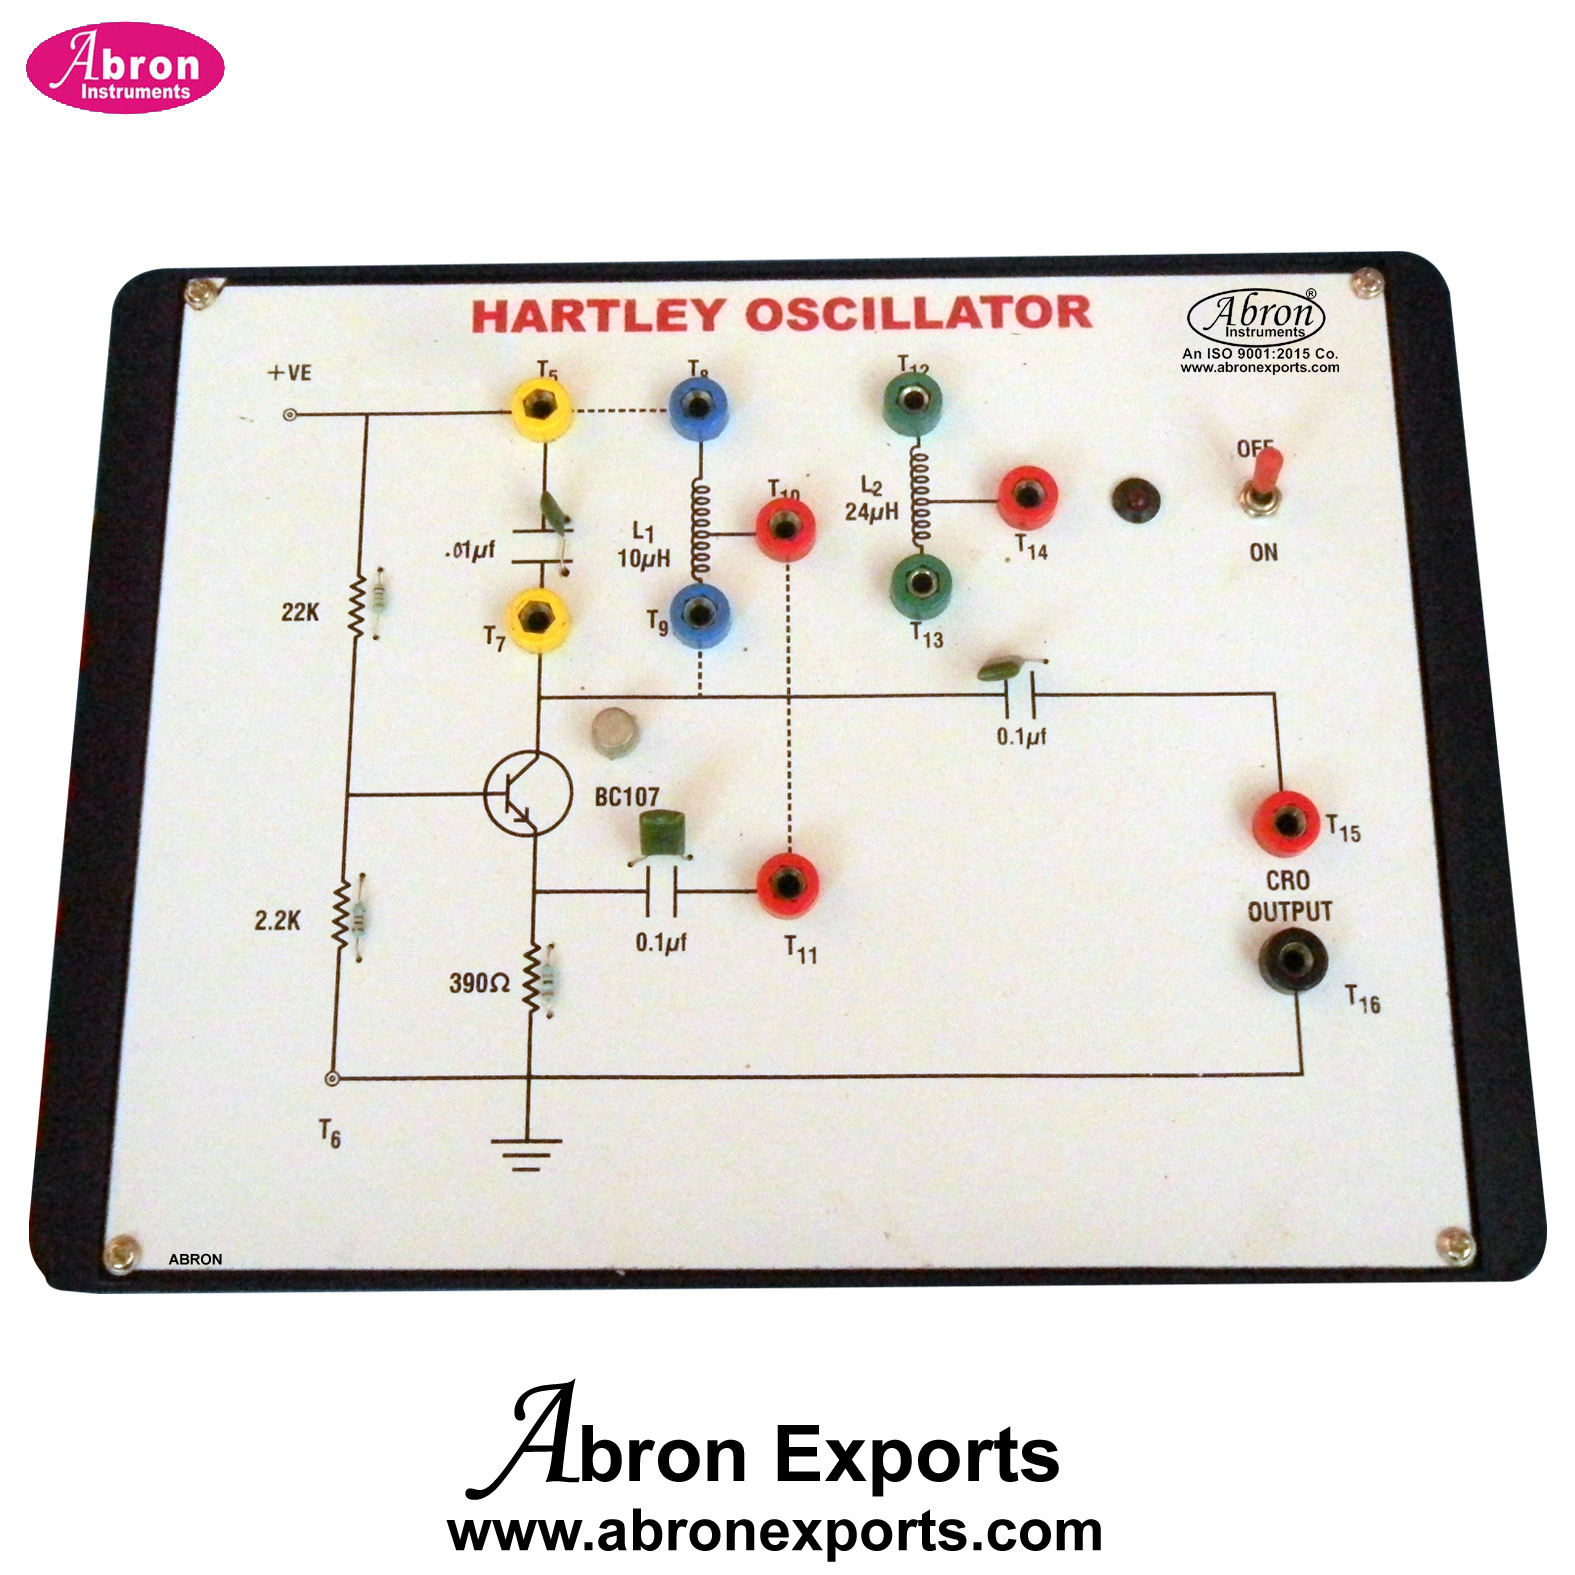 Hartley Oscillator Bsc Exp 183 Electronics To design Hartley oscillator and to calibrate the dial of its tank circuit capacitor in terms of frequency and to find the dielectric constant of a liquid sa